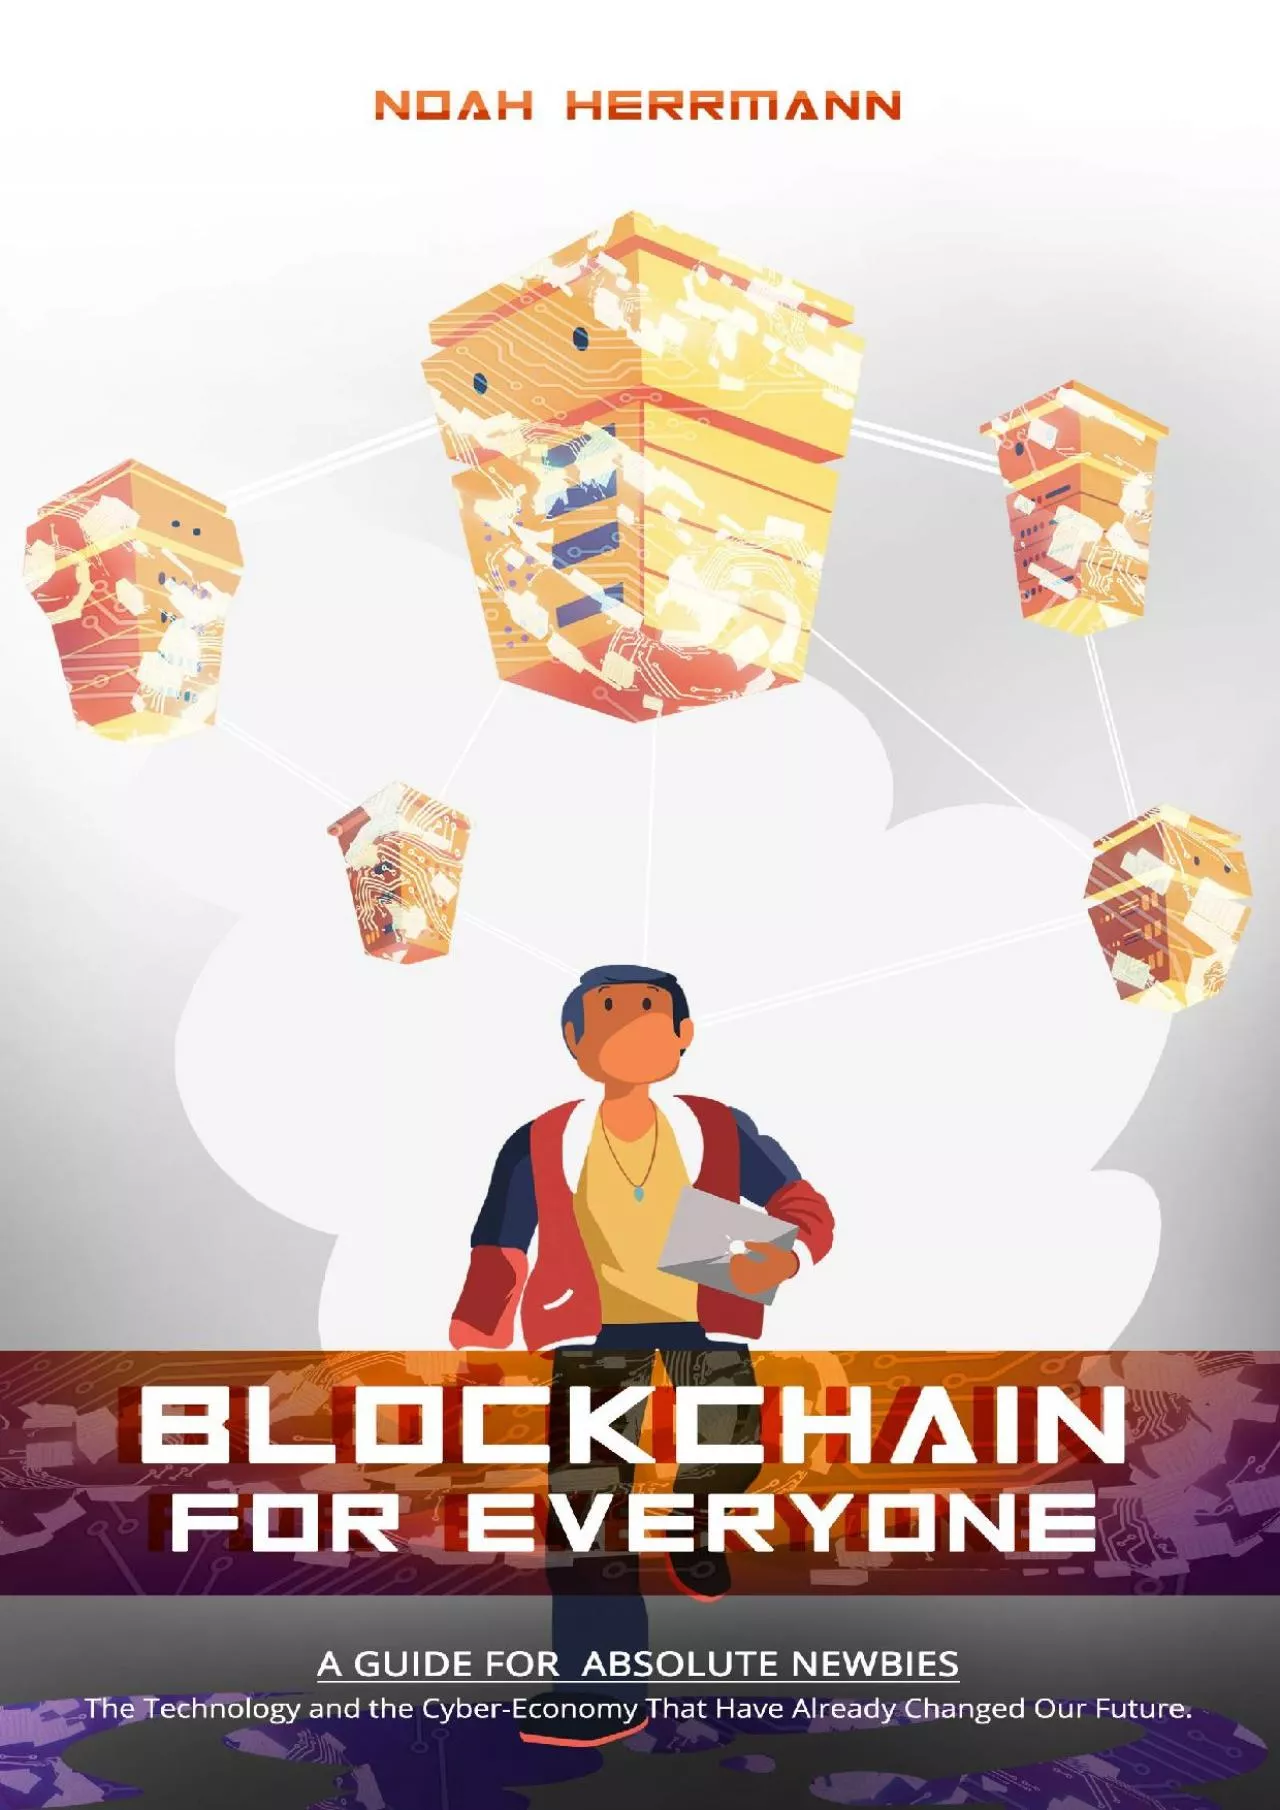 (BOOS)-BLOCKCHAIN FOR EVERYONE: A Guide for Absolute Newbies - The Technology and the